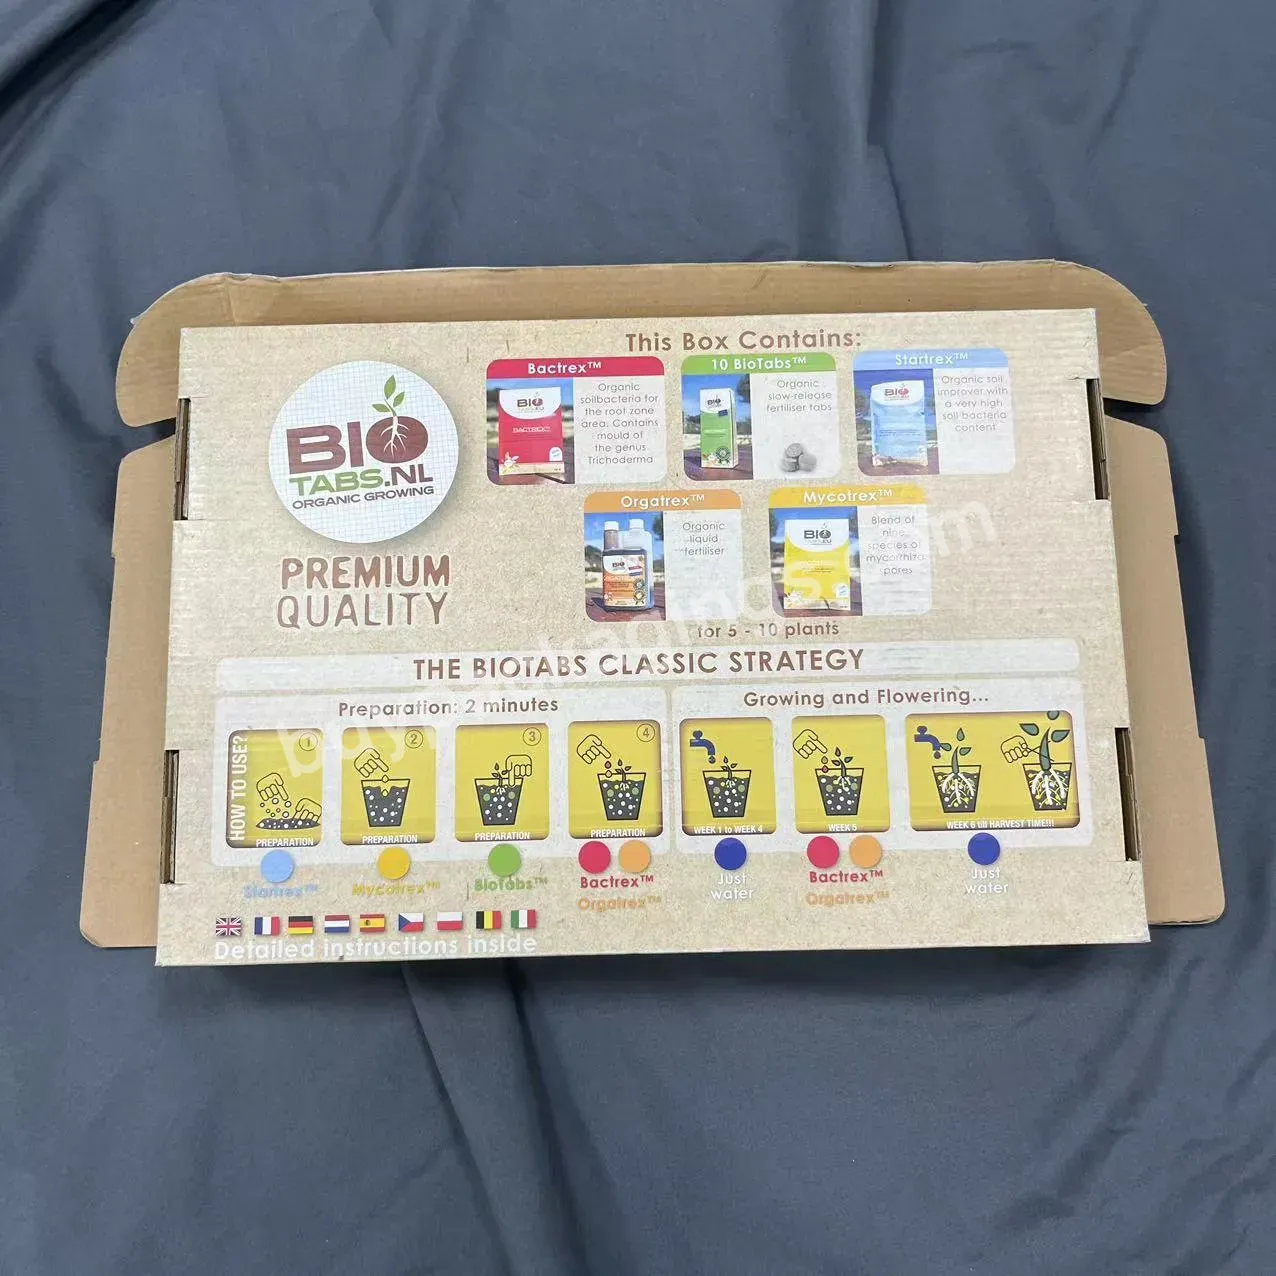 Newly Arrived Nut Gift Box That Can Be Used To Hold Snacks,Pizza,And Hamburger Boxes